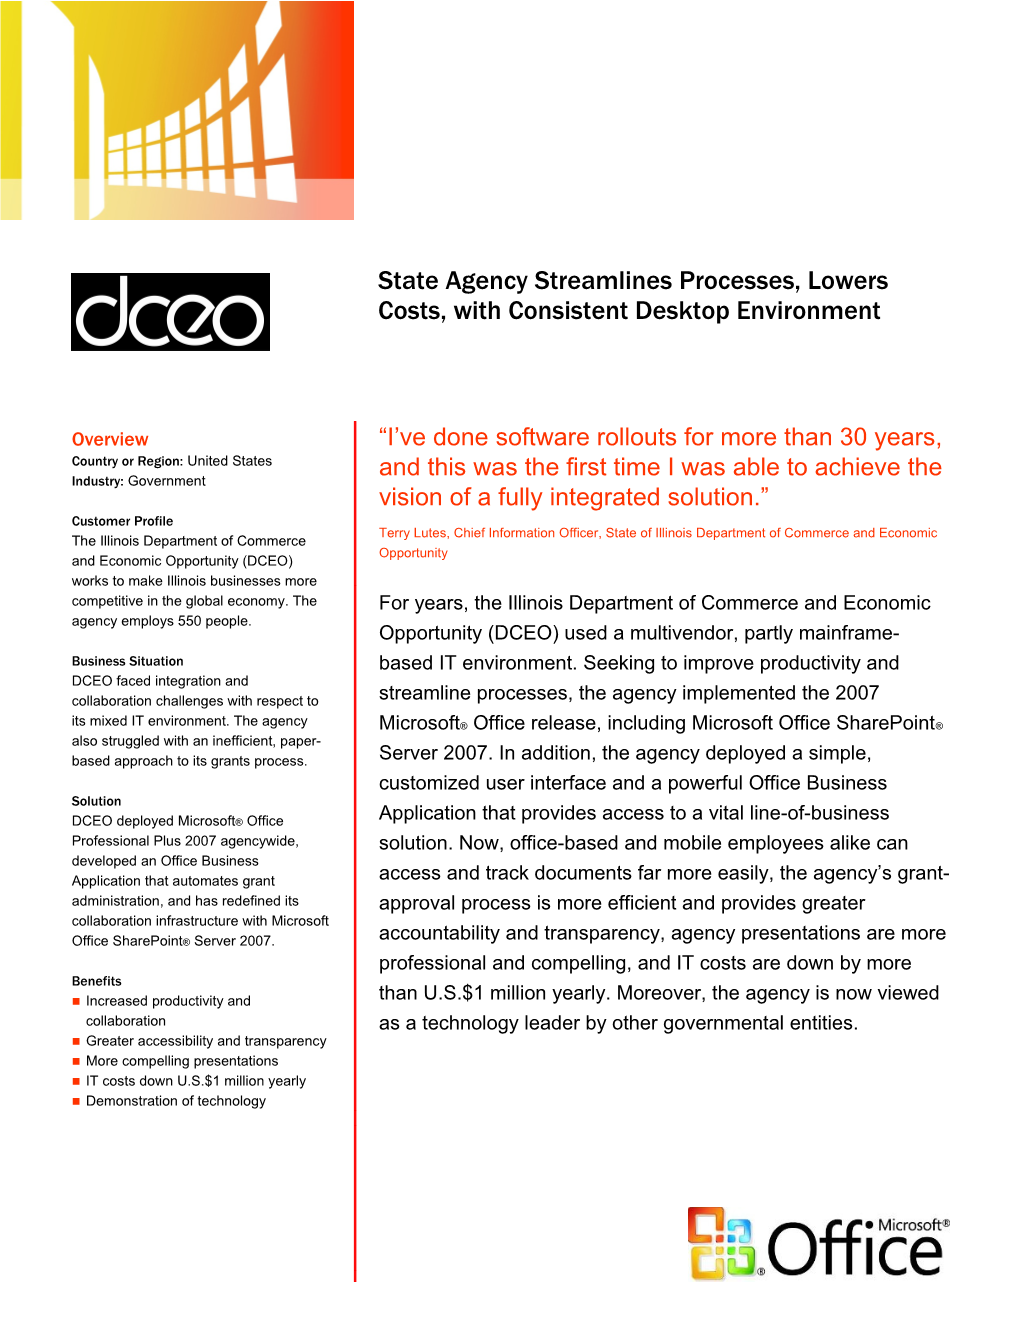 The State of Illinois Department of Commerce Andeconomic Opportunity (DCEO) Is Responsible